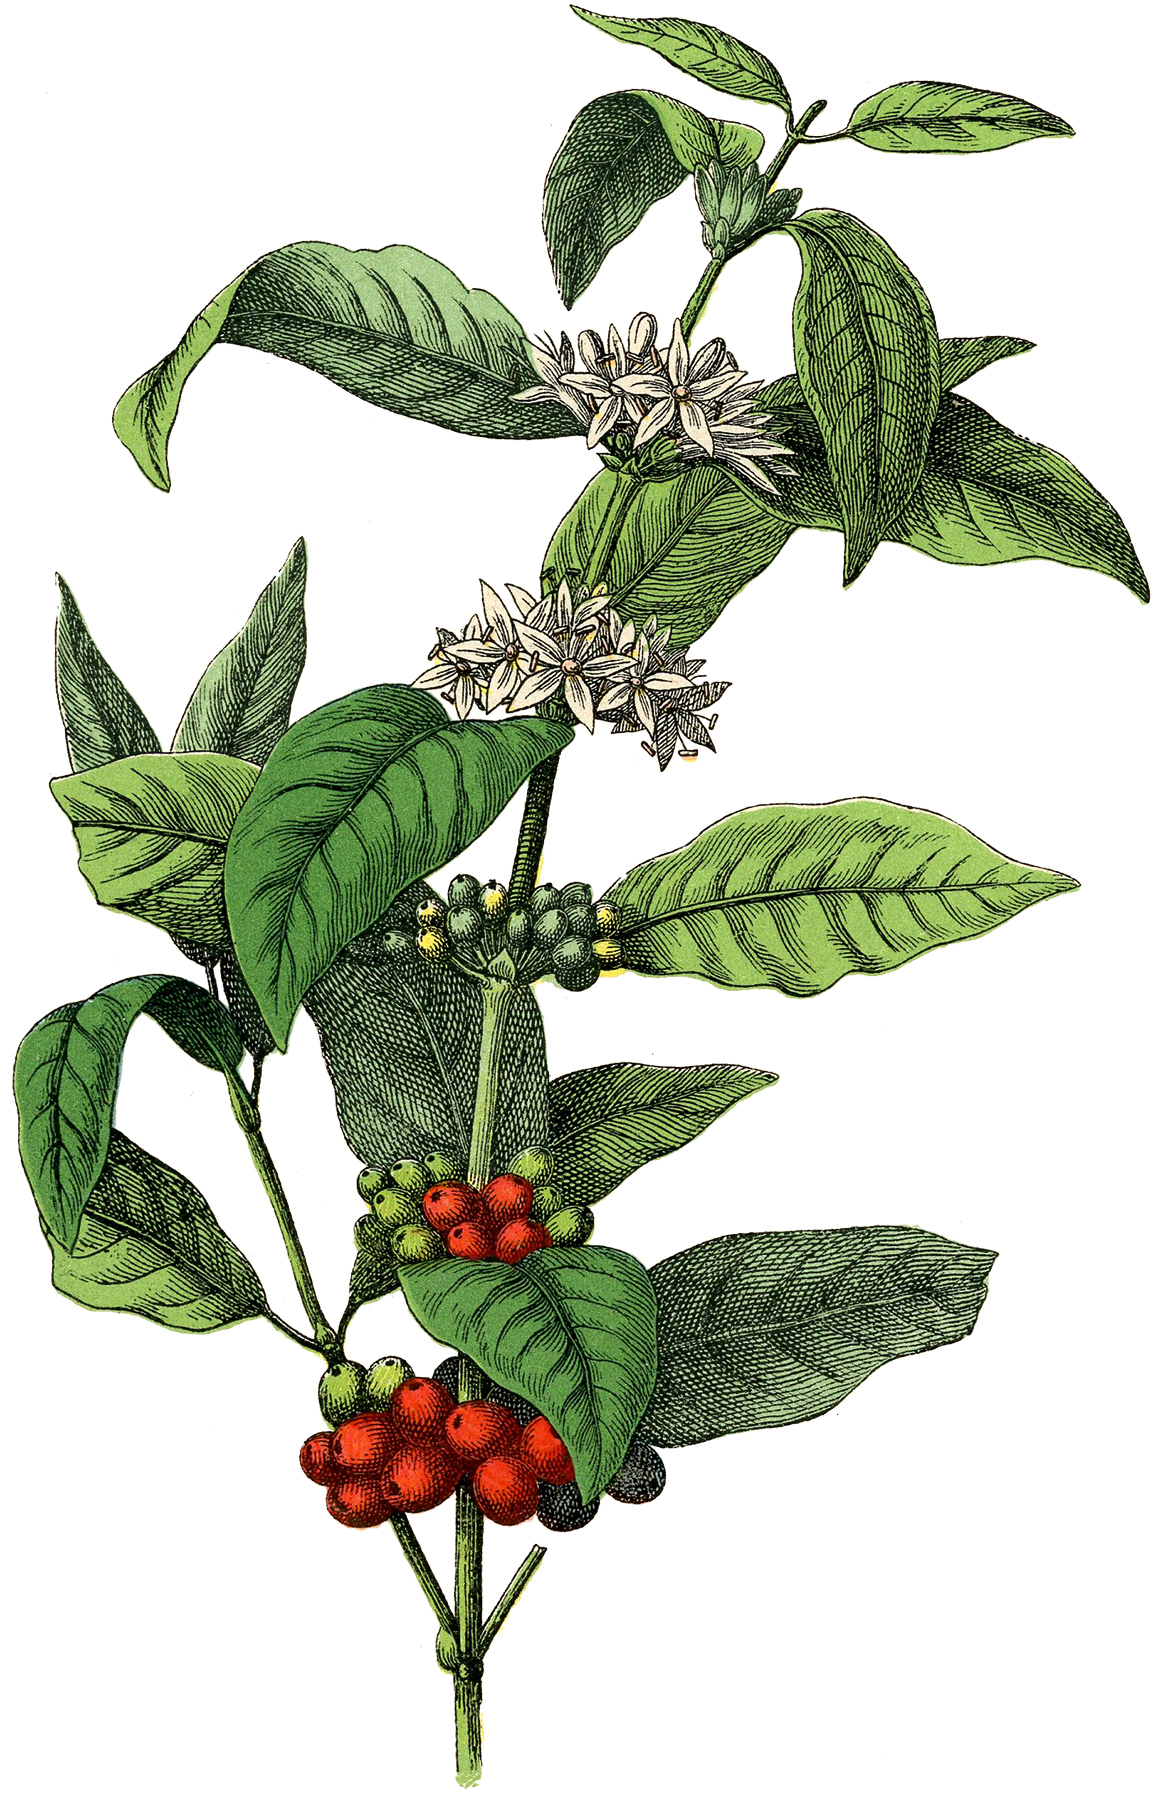 Coffee, Tea and Spice Plant Images! The Graphics Fairy